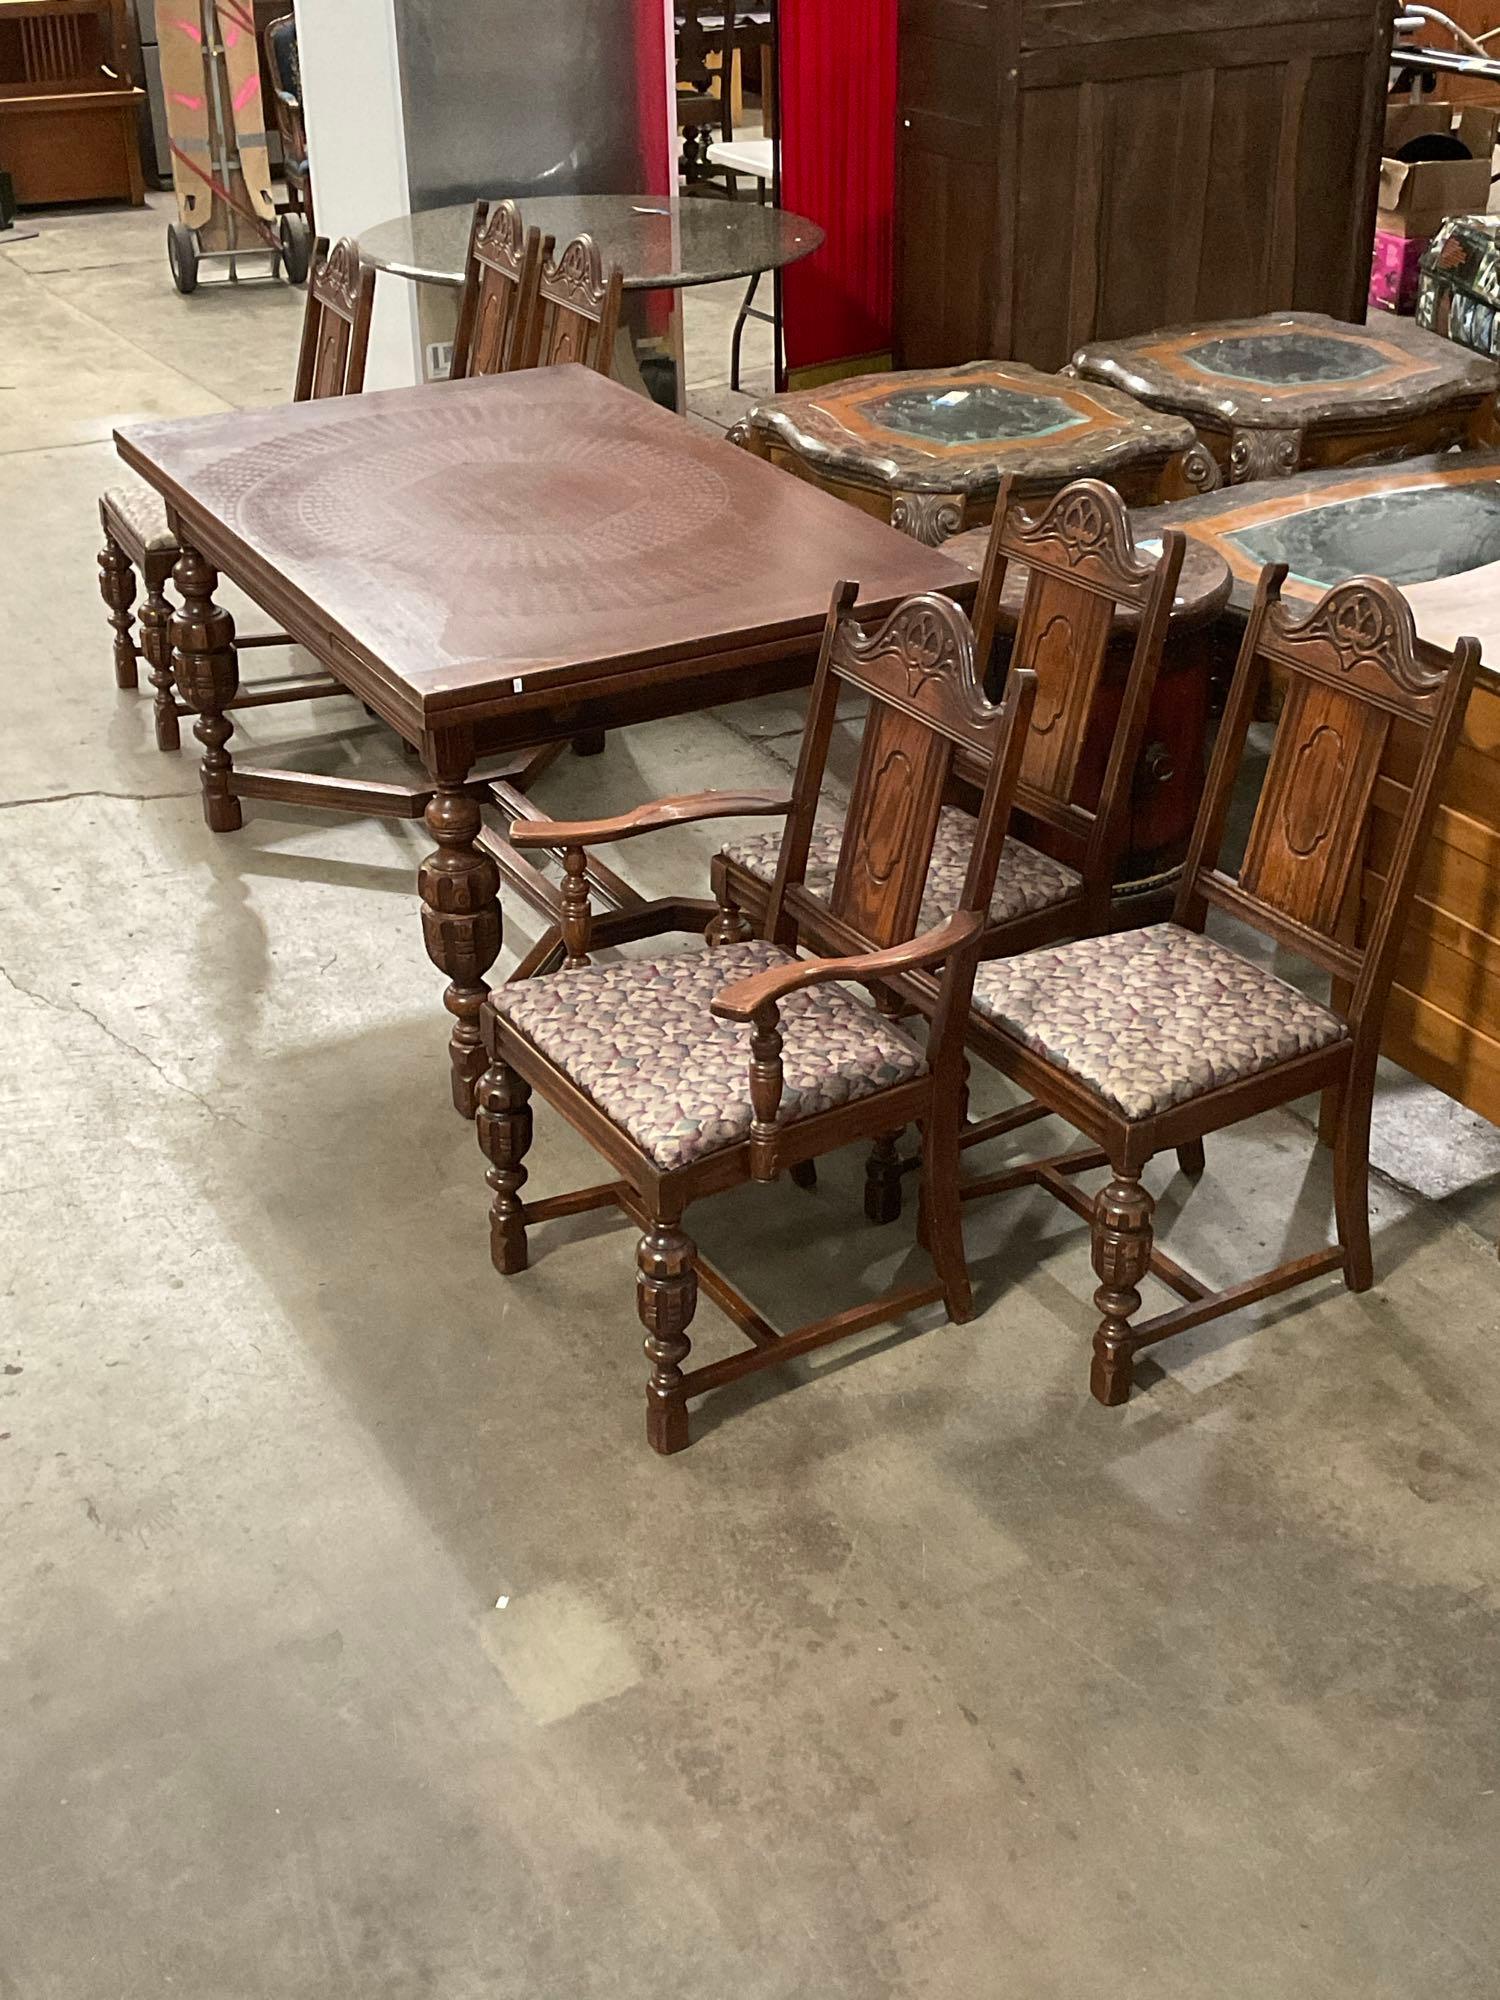 Antique / Vintage Wooden Dining Table w/ 2 Hideaway Leaves & 6 Chairs. Measures 60" x 31" See pics.